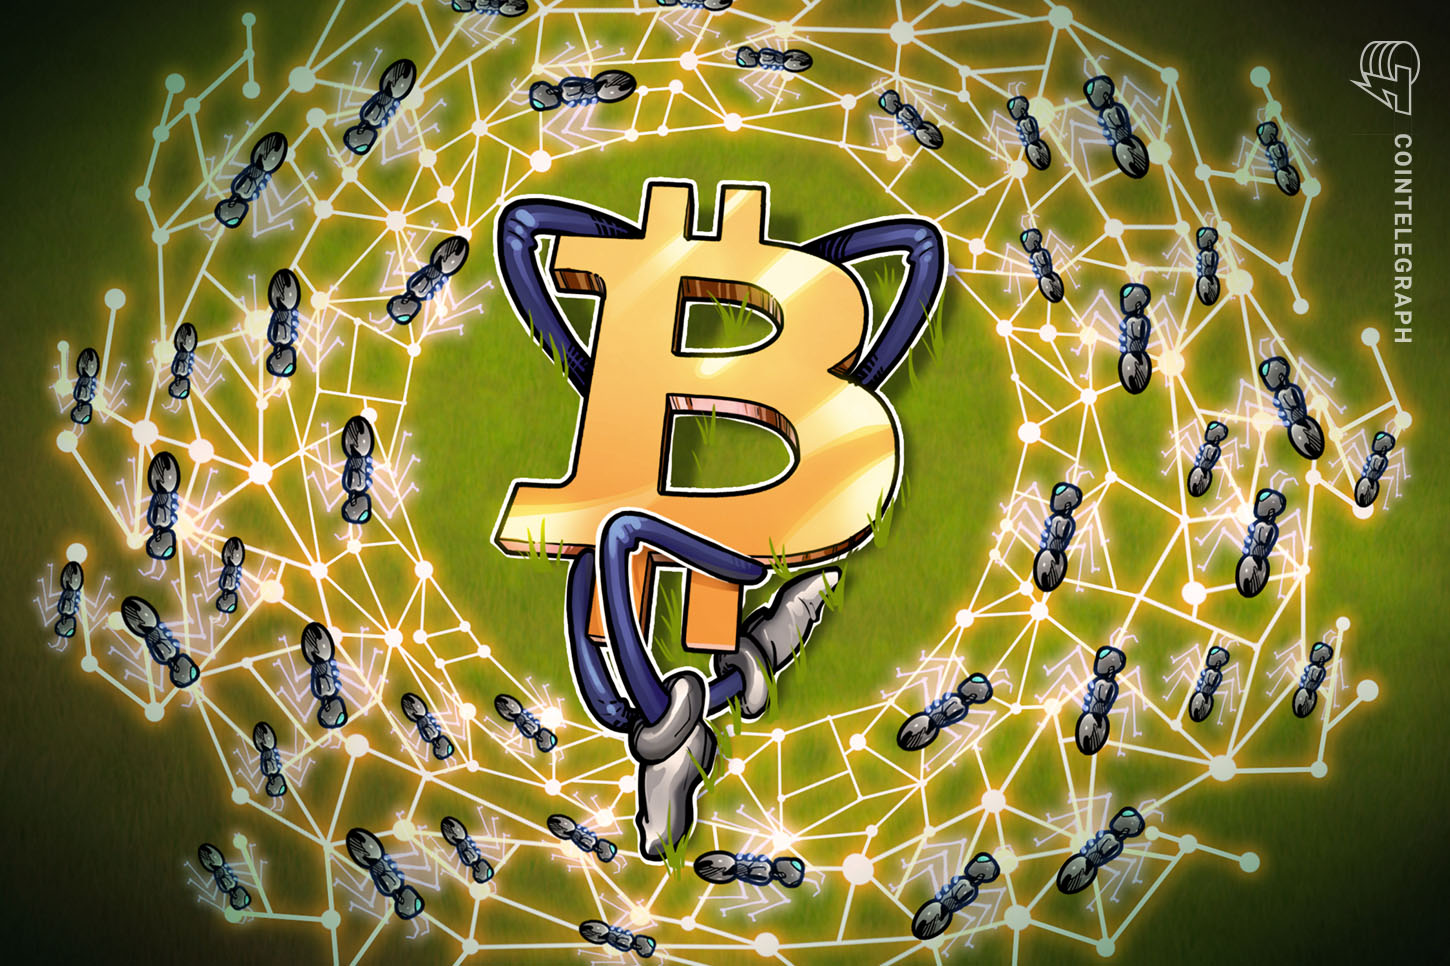 Bitcoin might flippen PayPal on bullish information from… PayPal